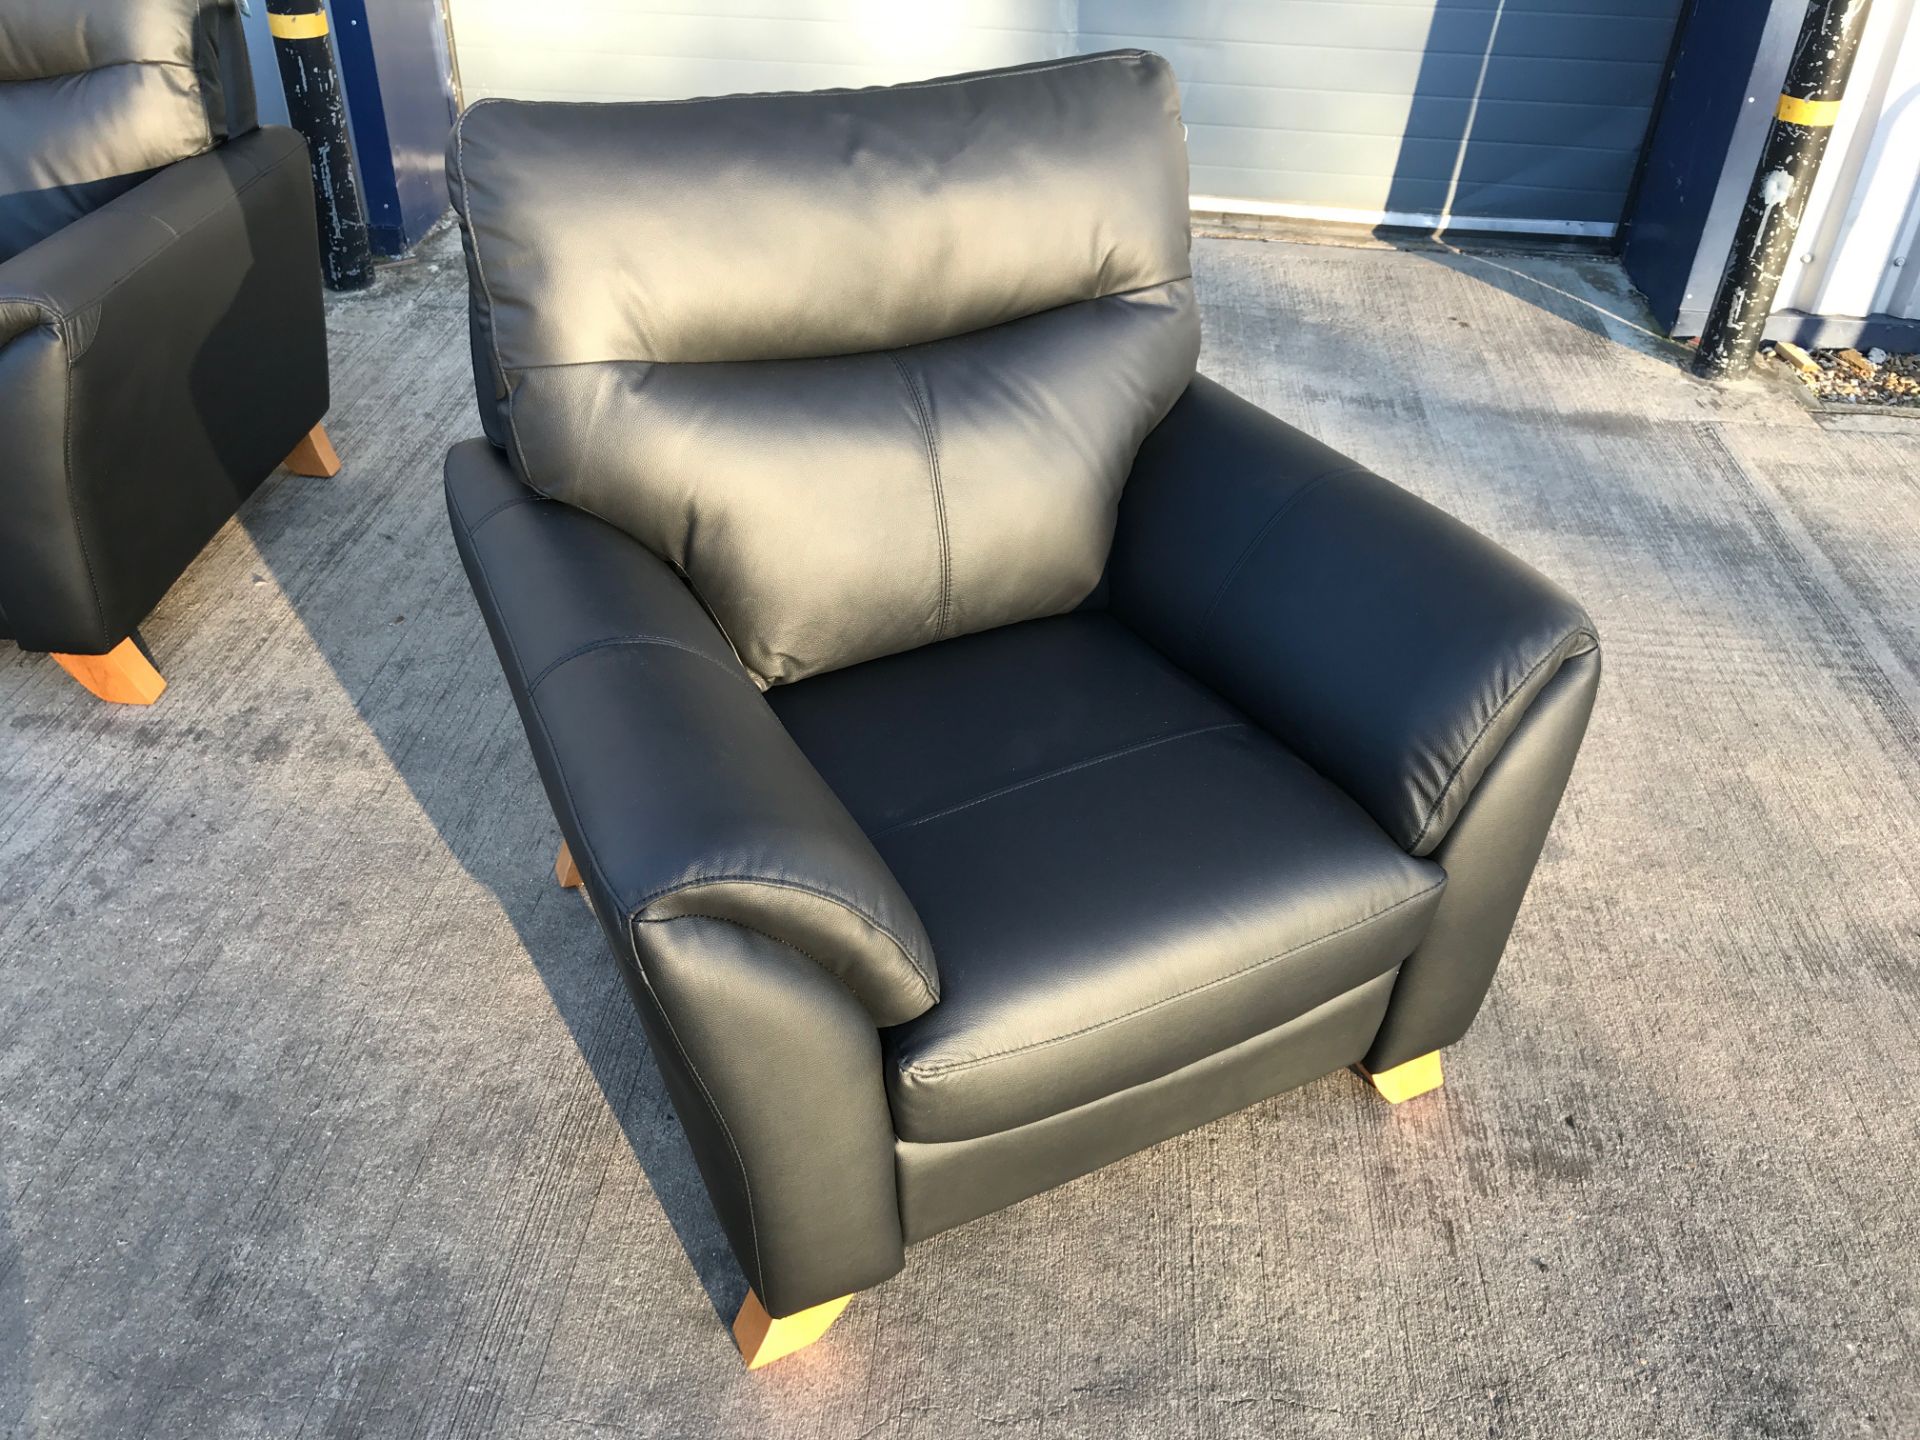 Cottesmore BLACK Single Seat Real Leather Chair - No Reserve - Image 3 of 6